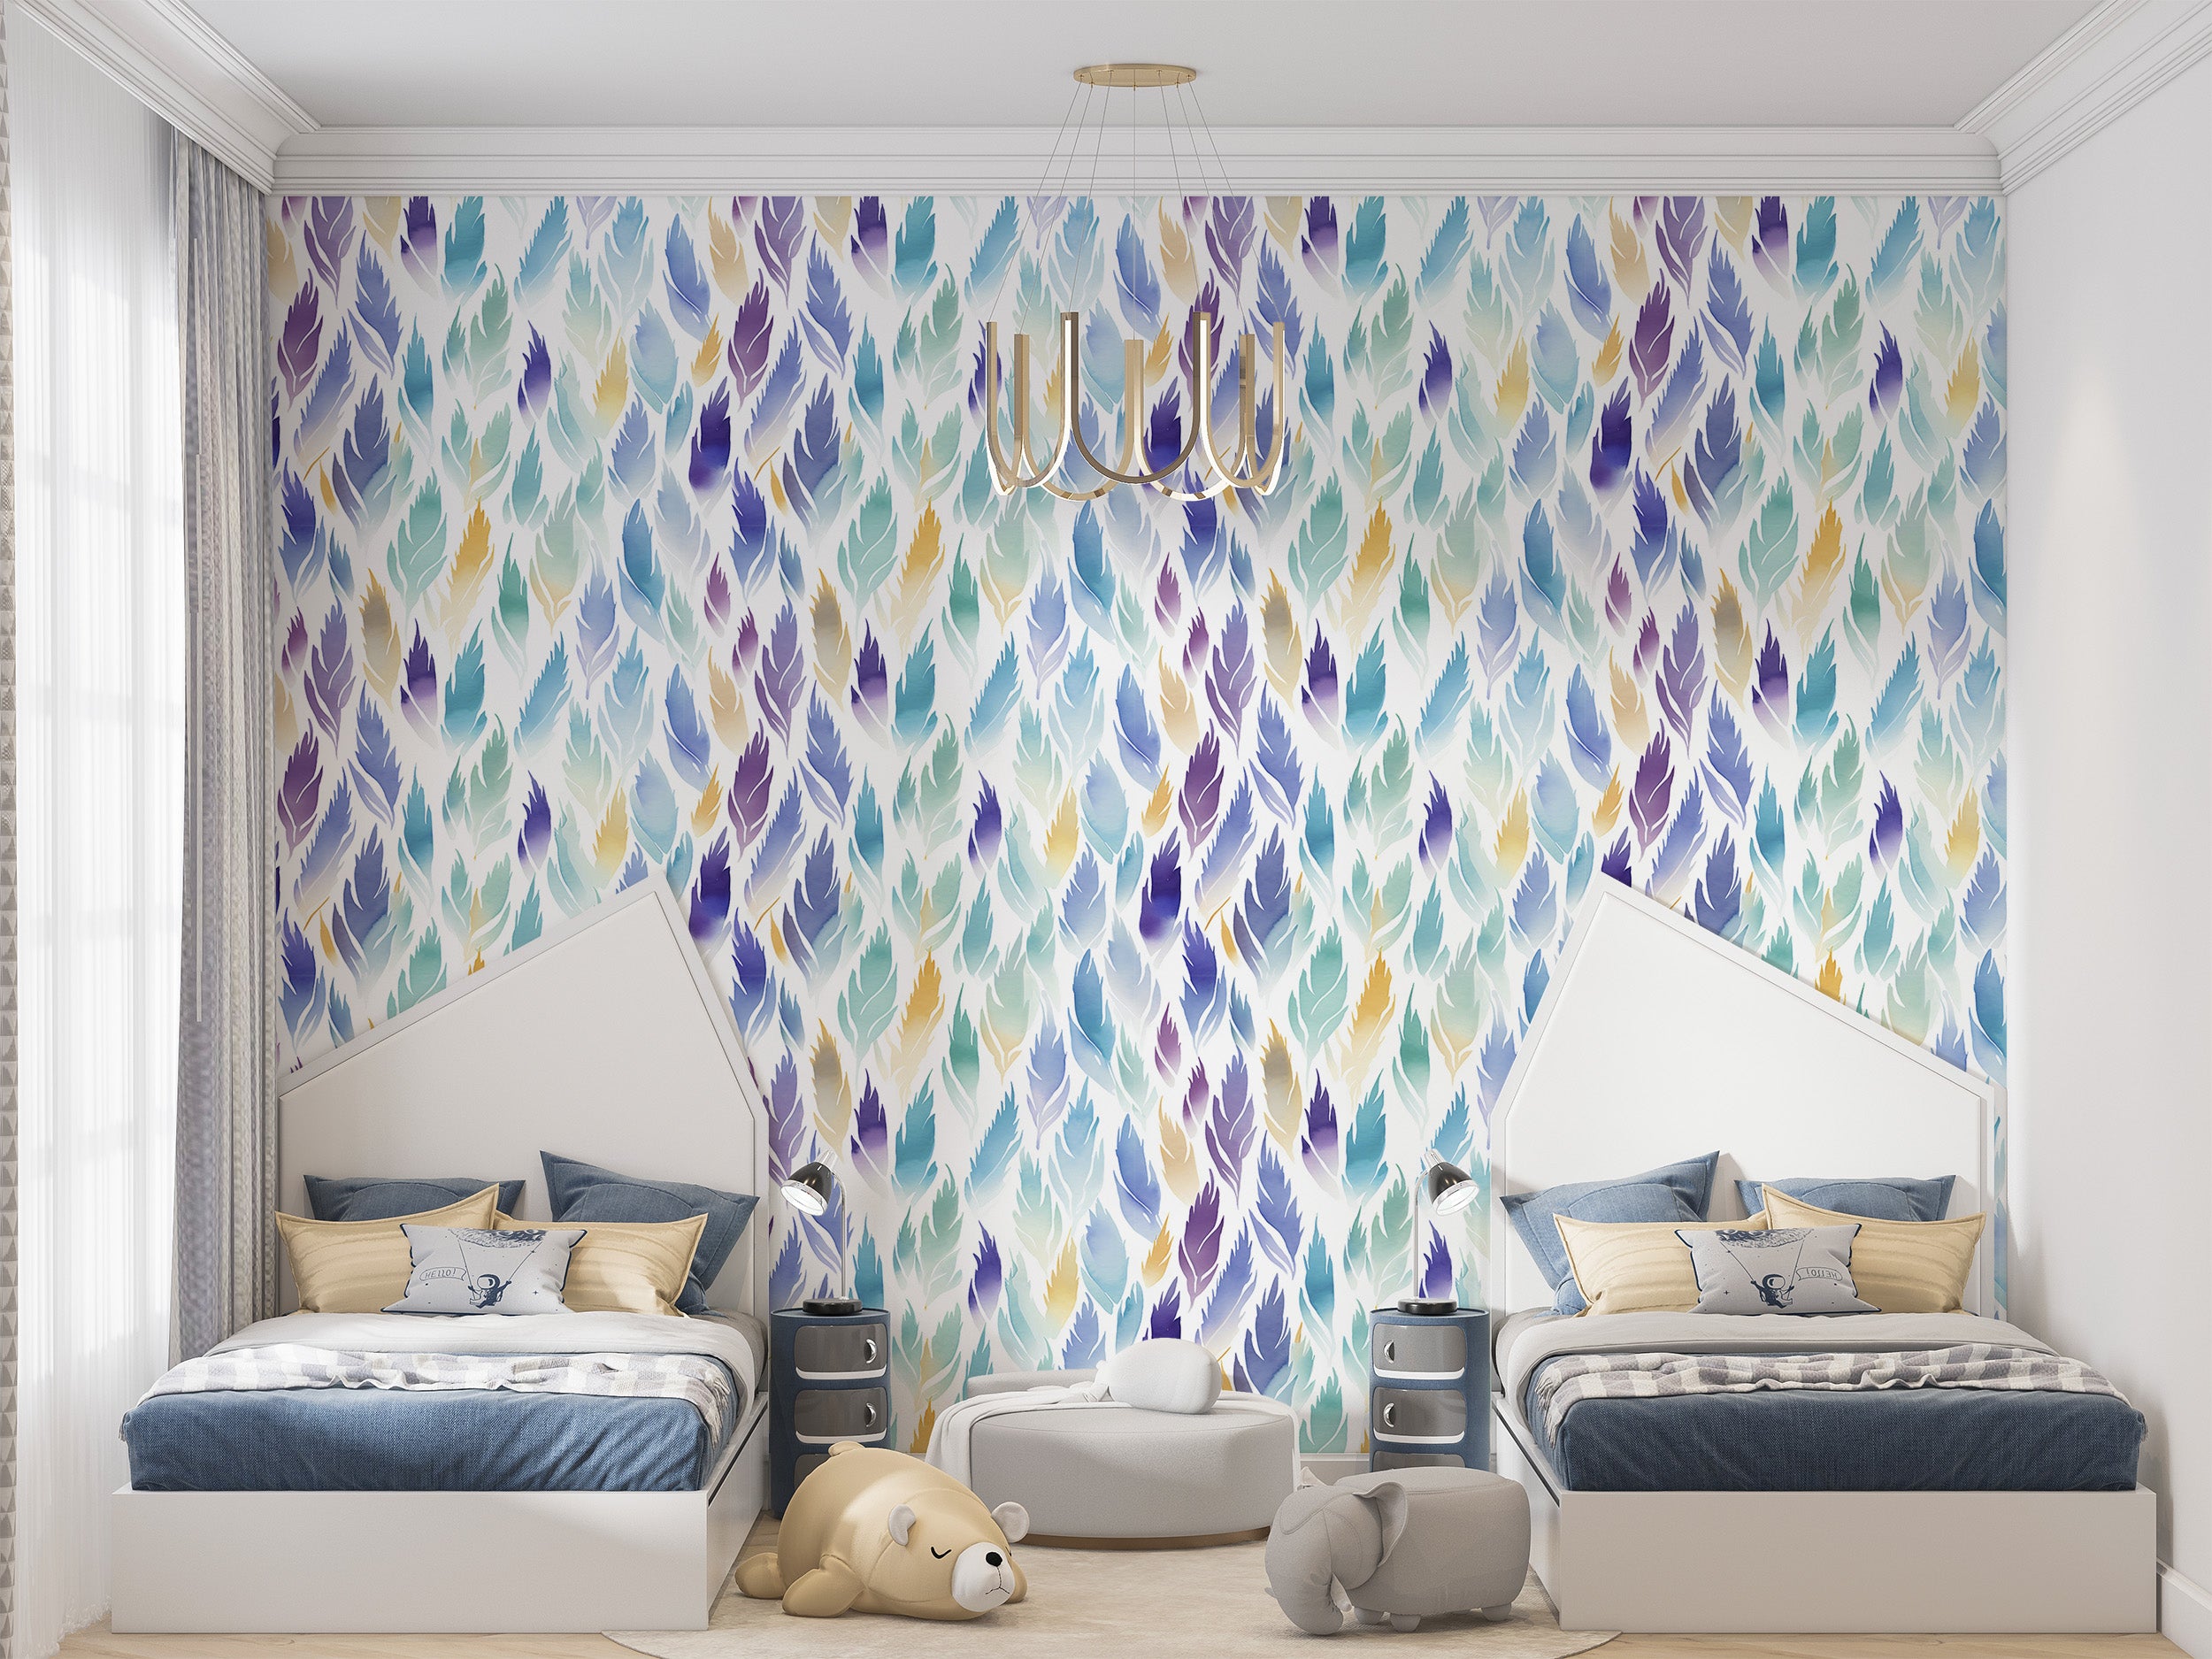 Create a Whimsical Ambiance with Kids' Room Wallpaper